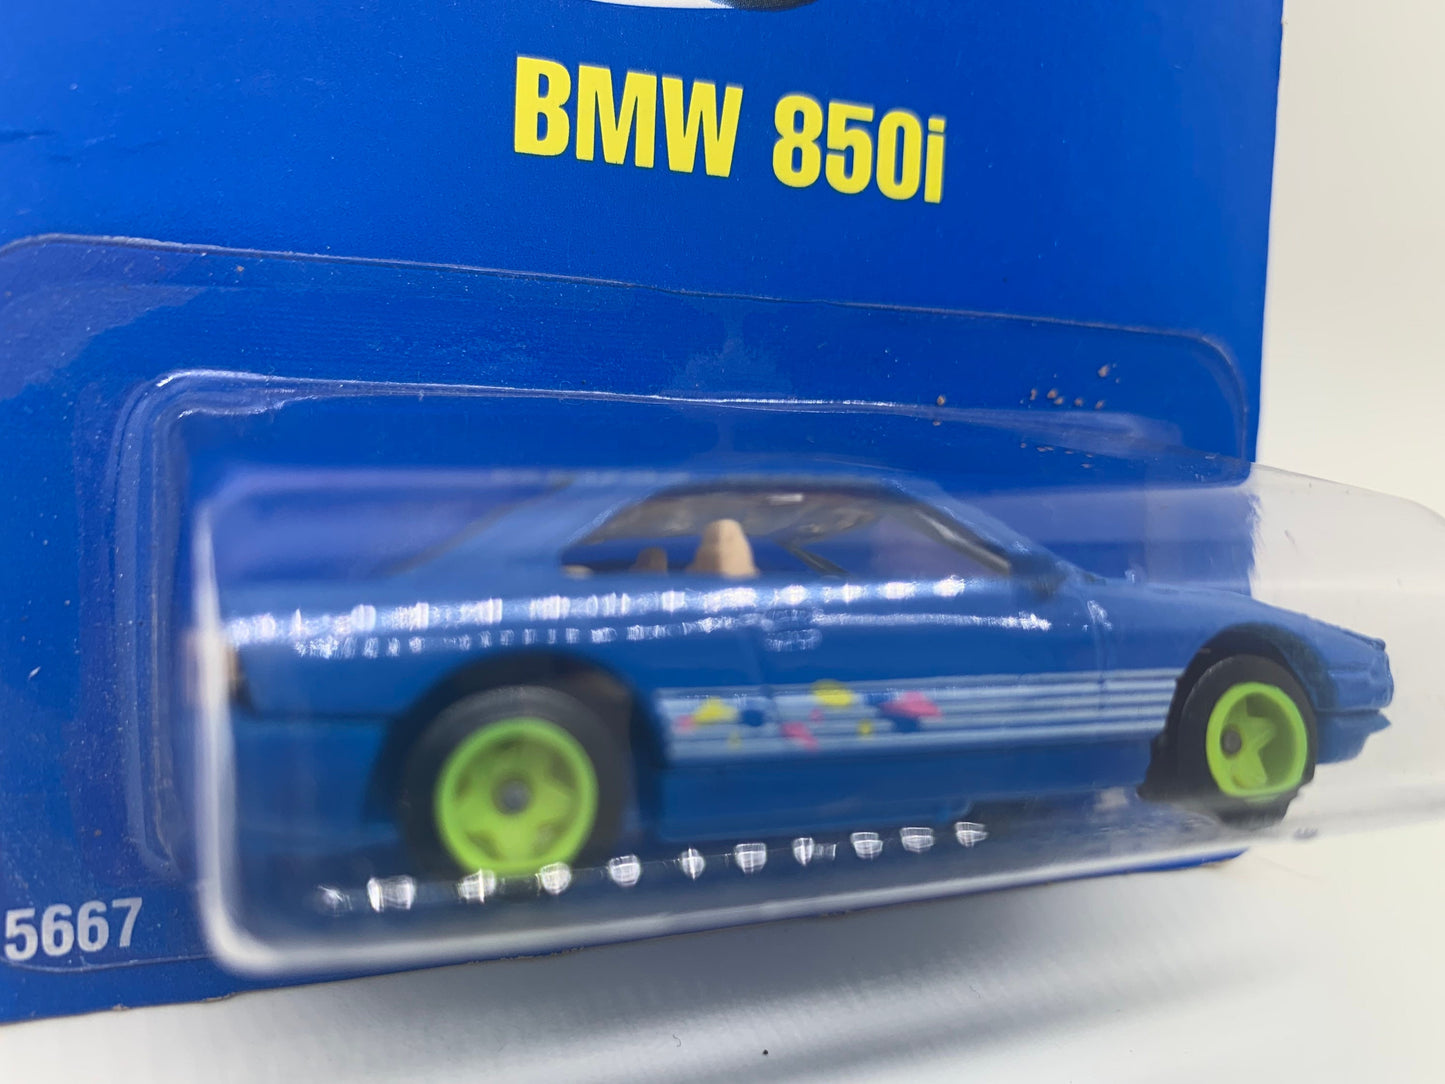 Hot Wheels BMW 850i Blue Collector #149 Miniature Collectable Model Toy Car Perfect Birthday Gift